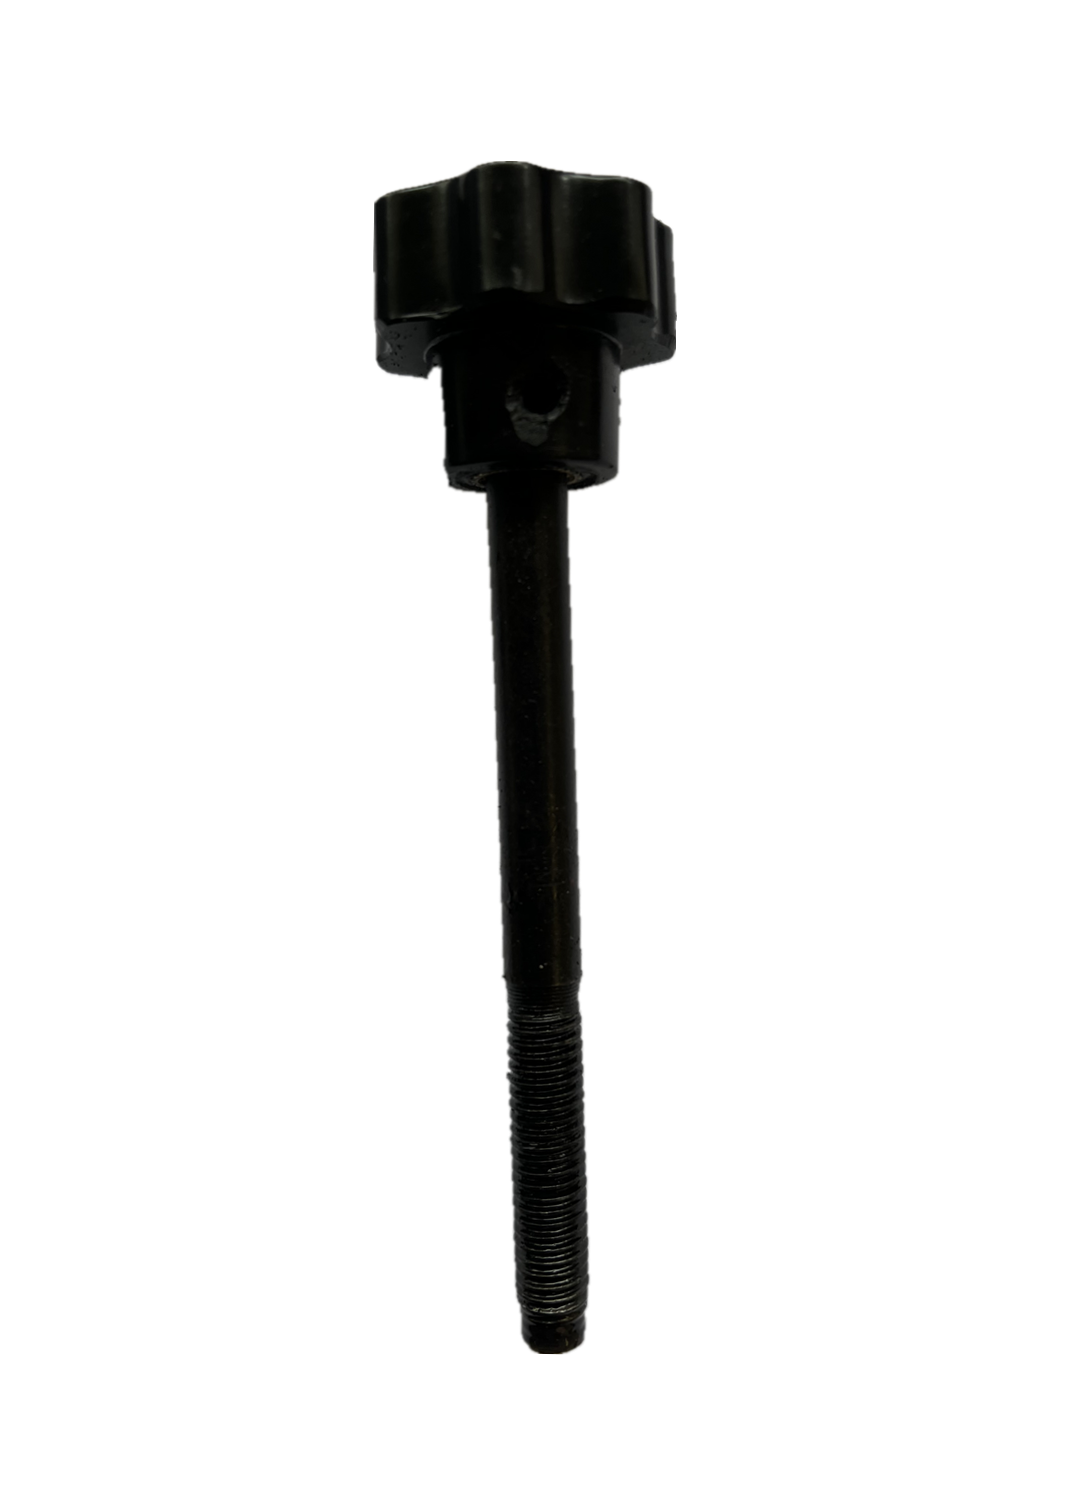 Star knob and rod for 171000 3-IN-1/8